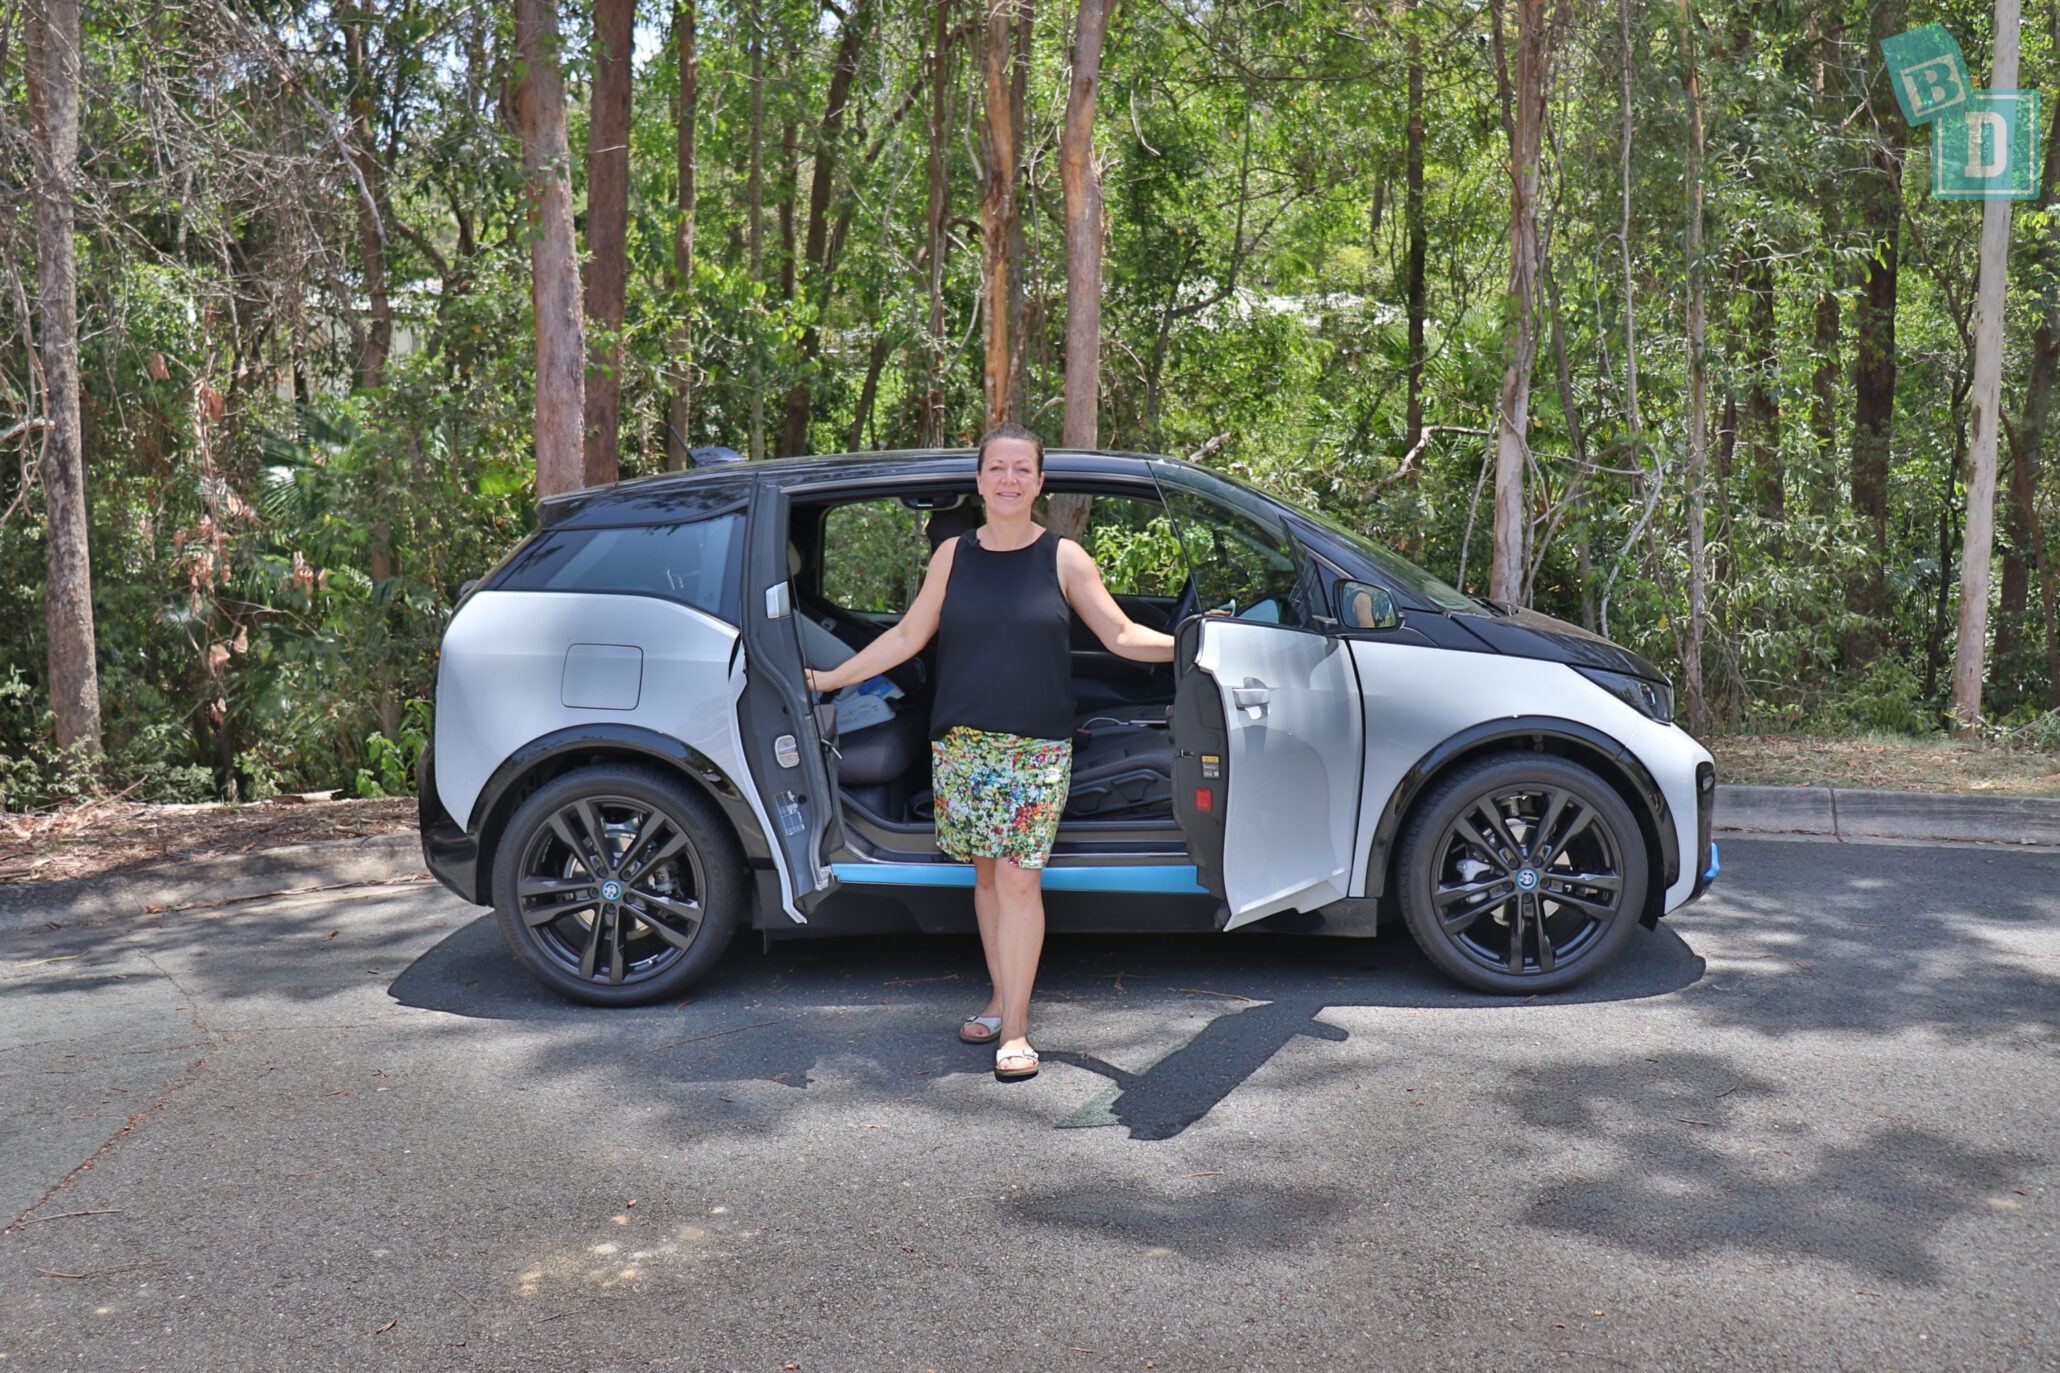 2019 BMW i3s Review: Futuristic And Fun, But Still Flawed